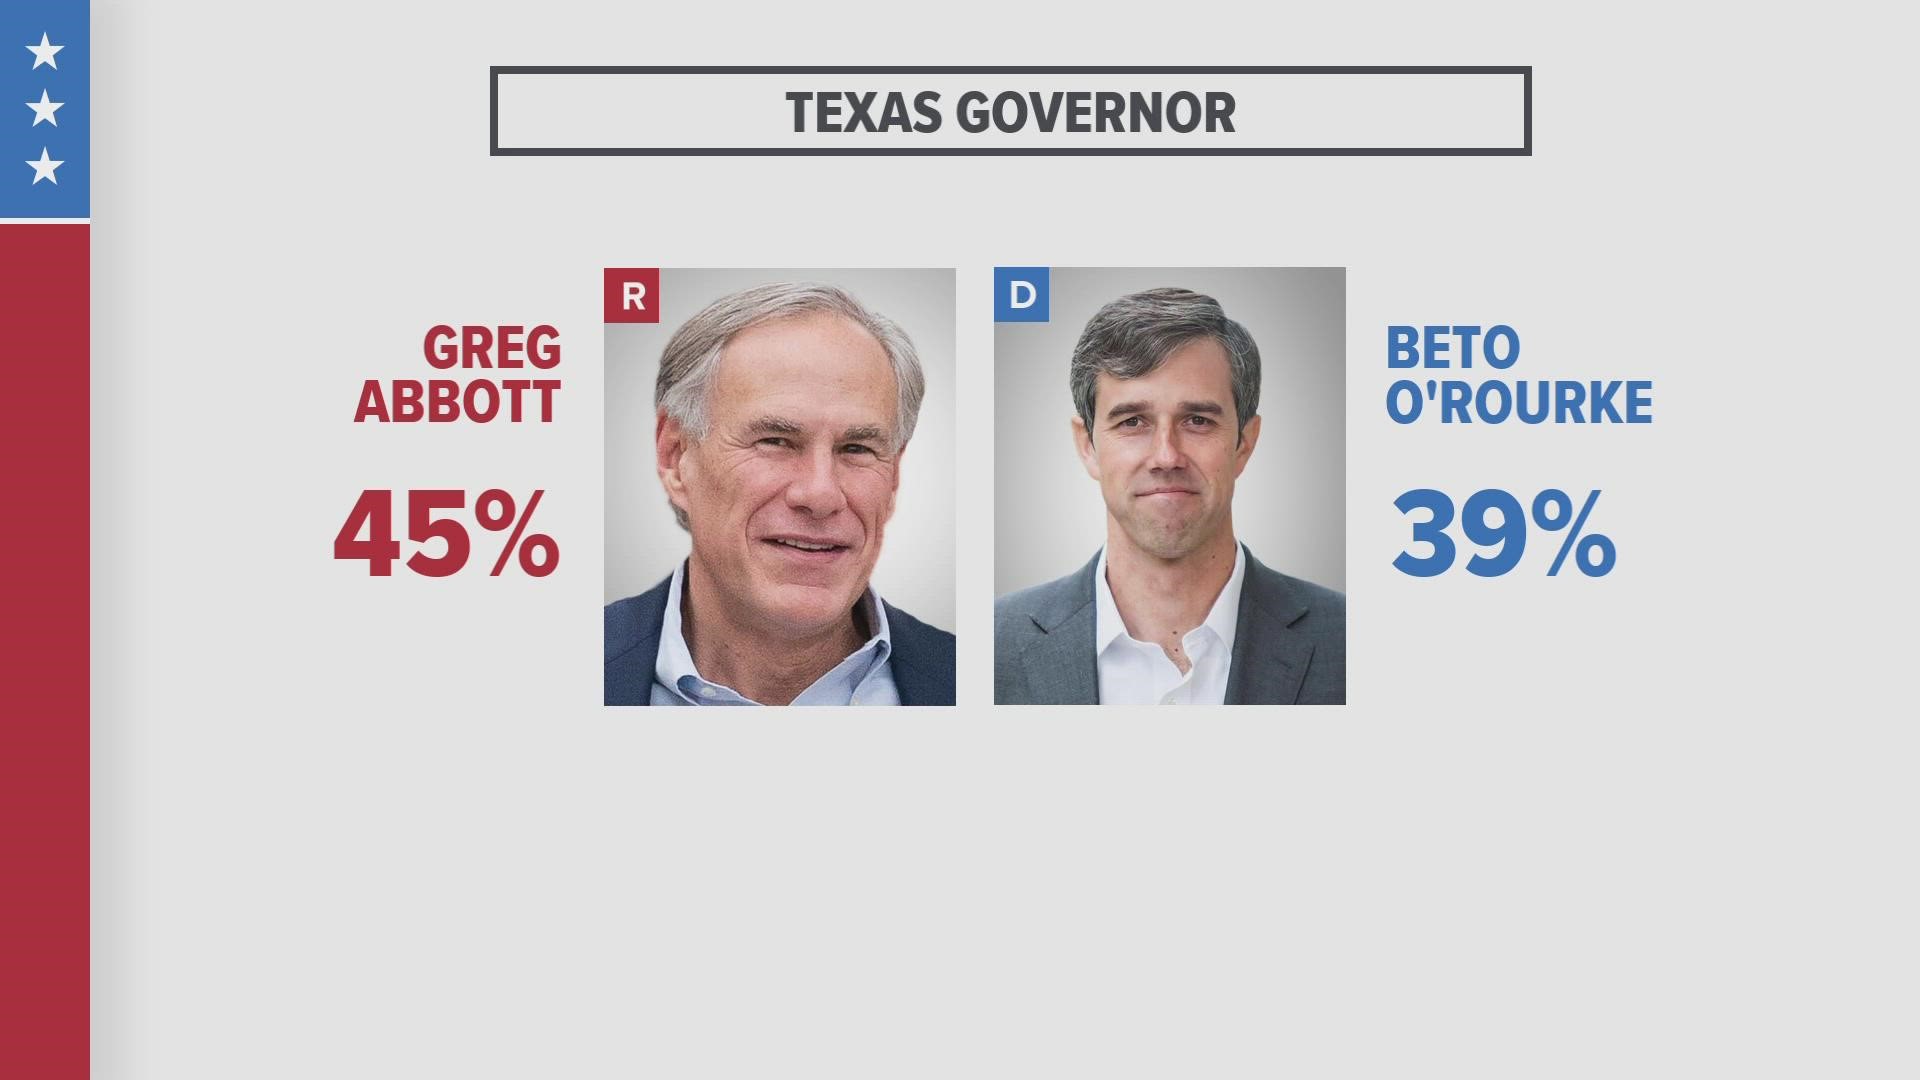 Governor Greg Abbott’s lead over former Congressman Beto O’rourke is shrinking according to a new University of Texas poll.